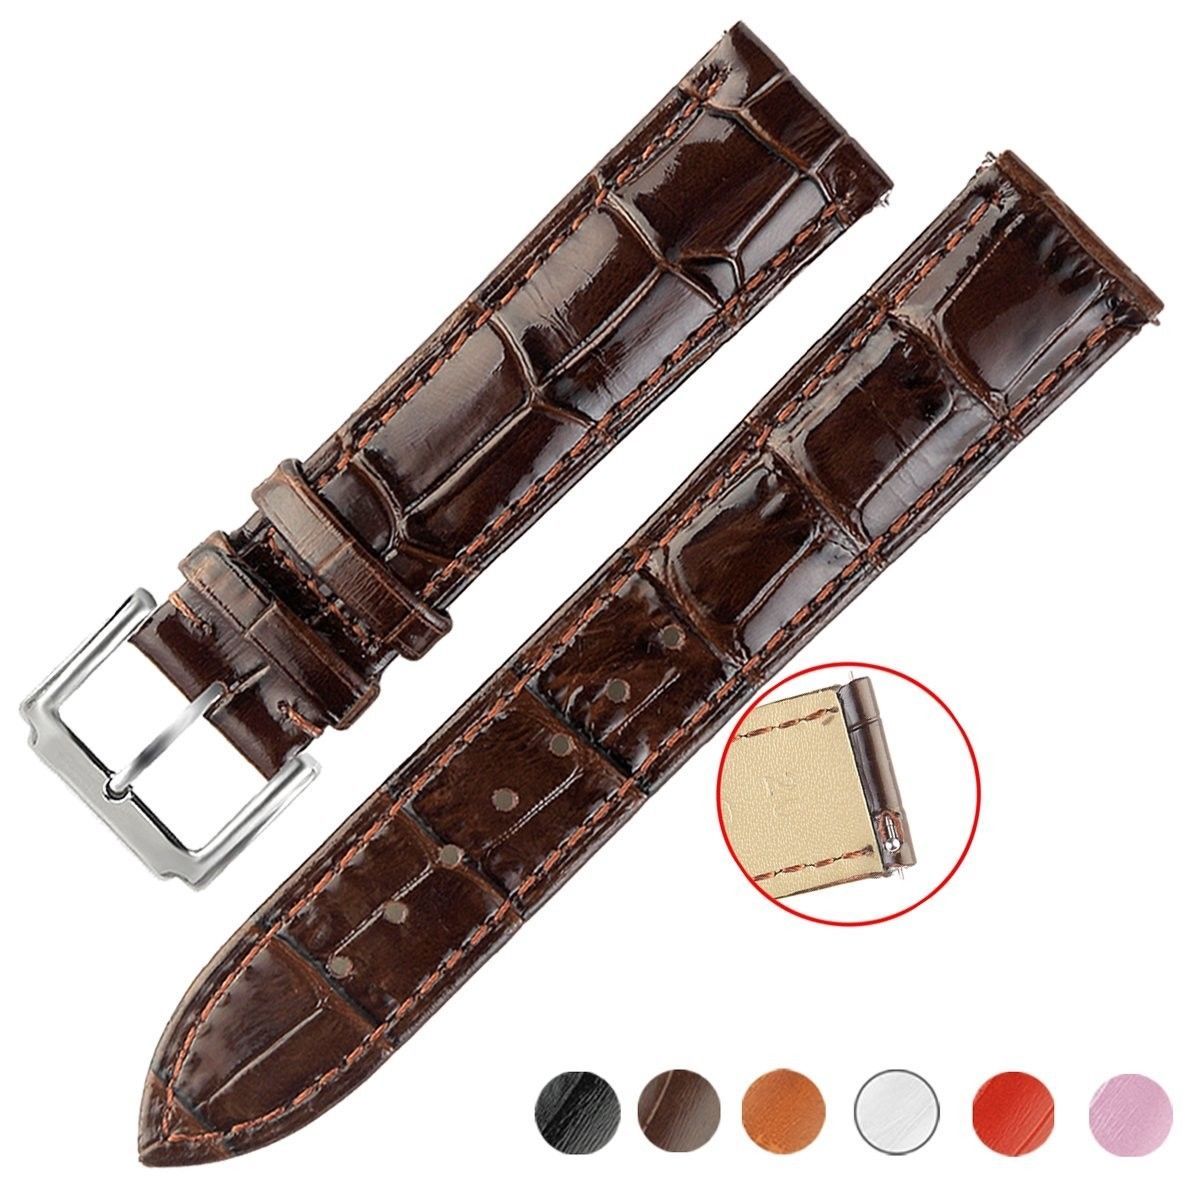 OWNITOW Quick Release Leather Watch Bands, Genuine Leather Watch Straps 18mm, De